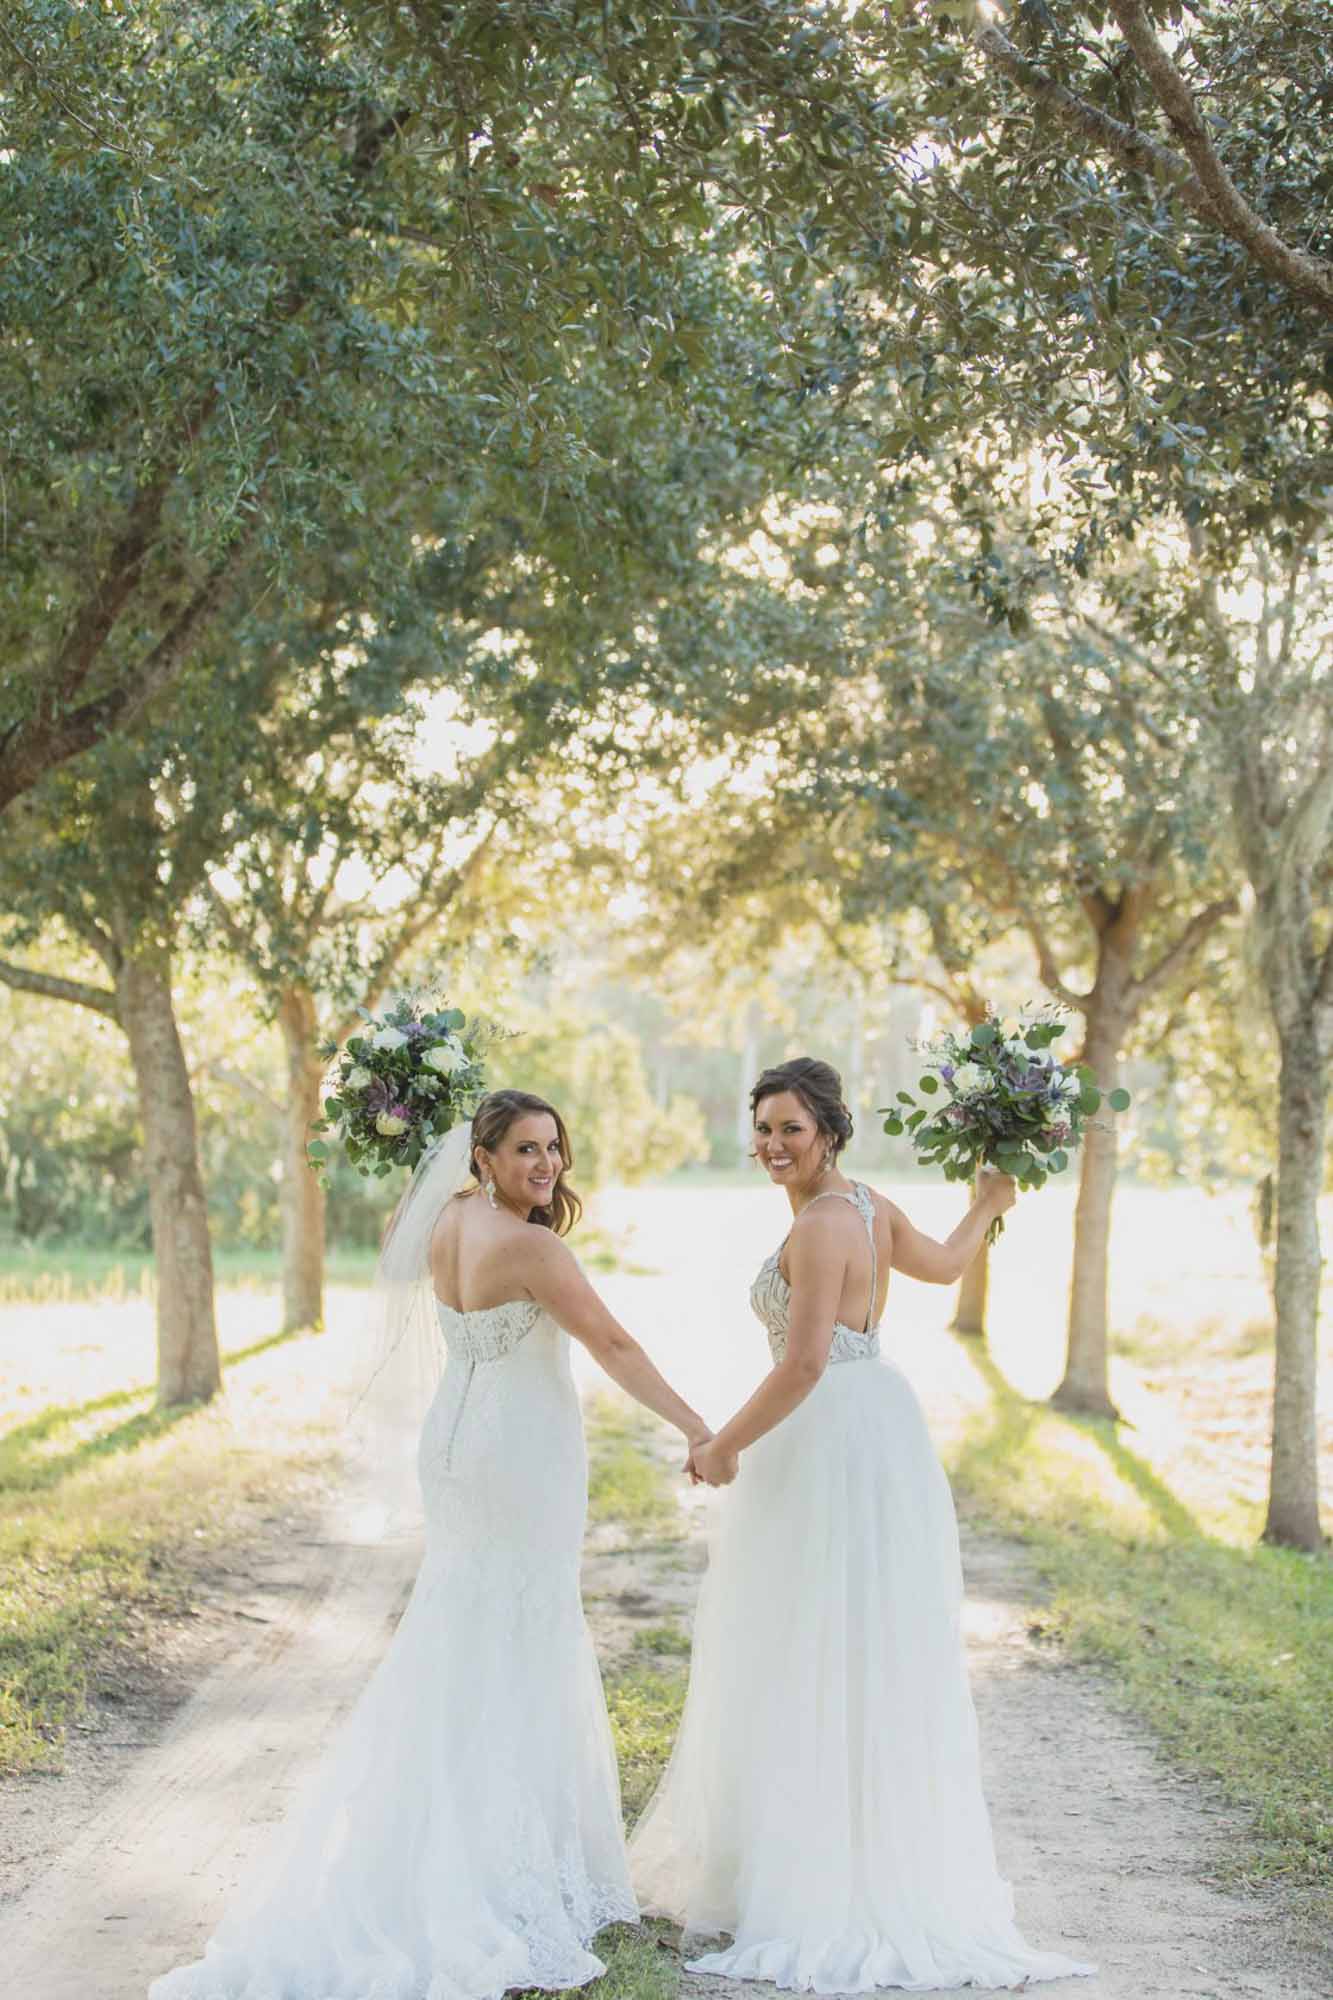 Rustic chic barn wedding by the beach | Ashley Jane Photography | Featured on Equally Wed, the leading LGBTQ+ wedding magazine